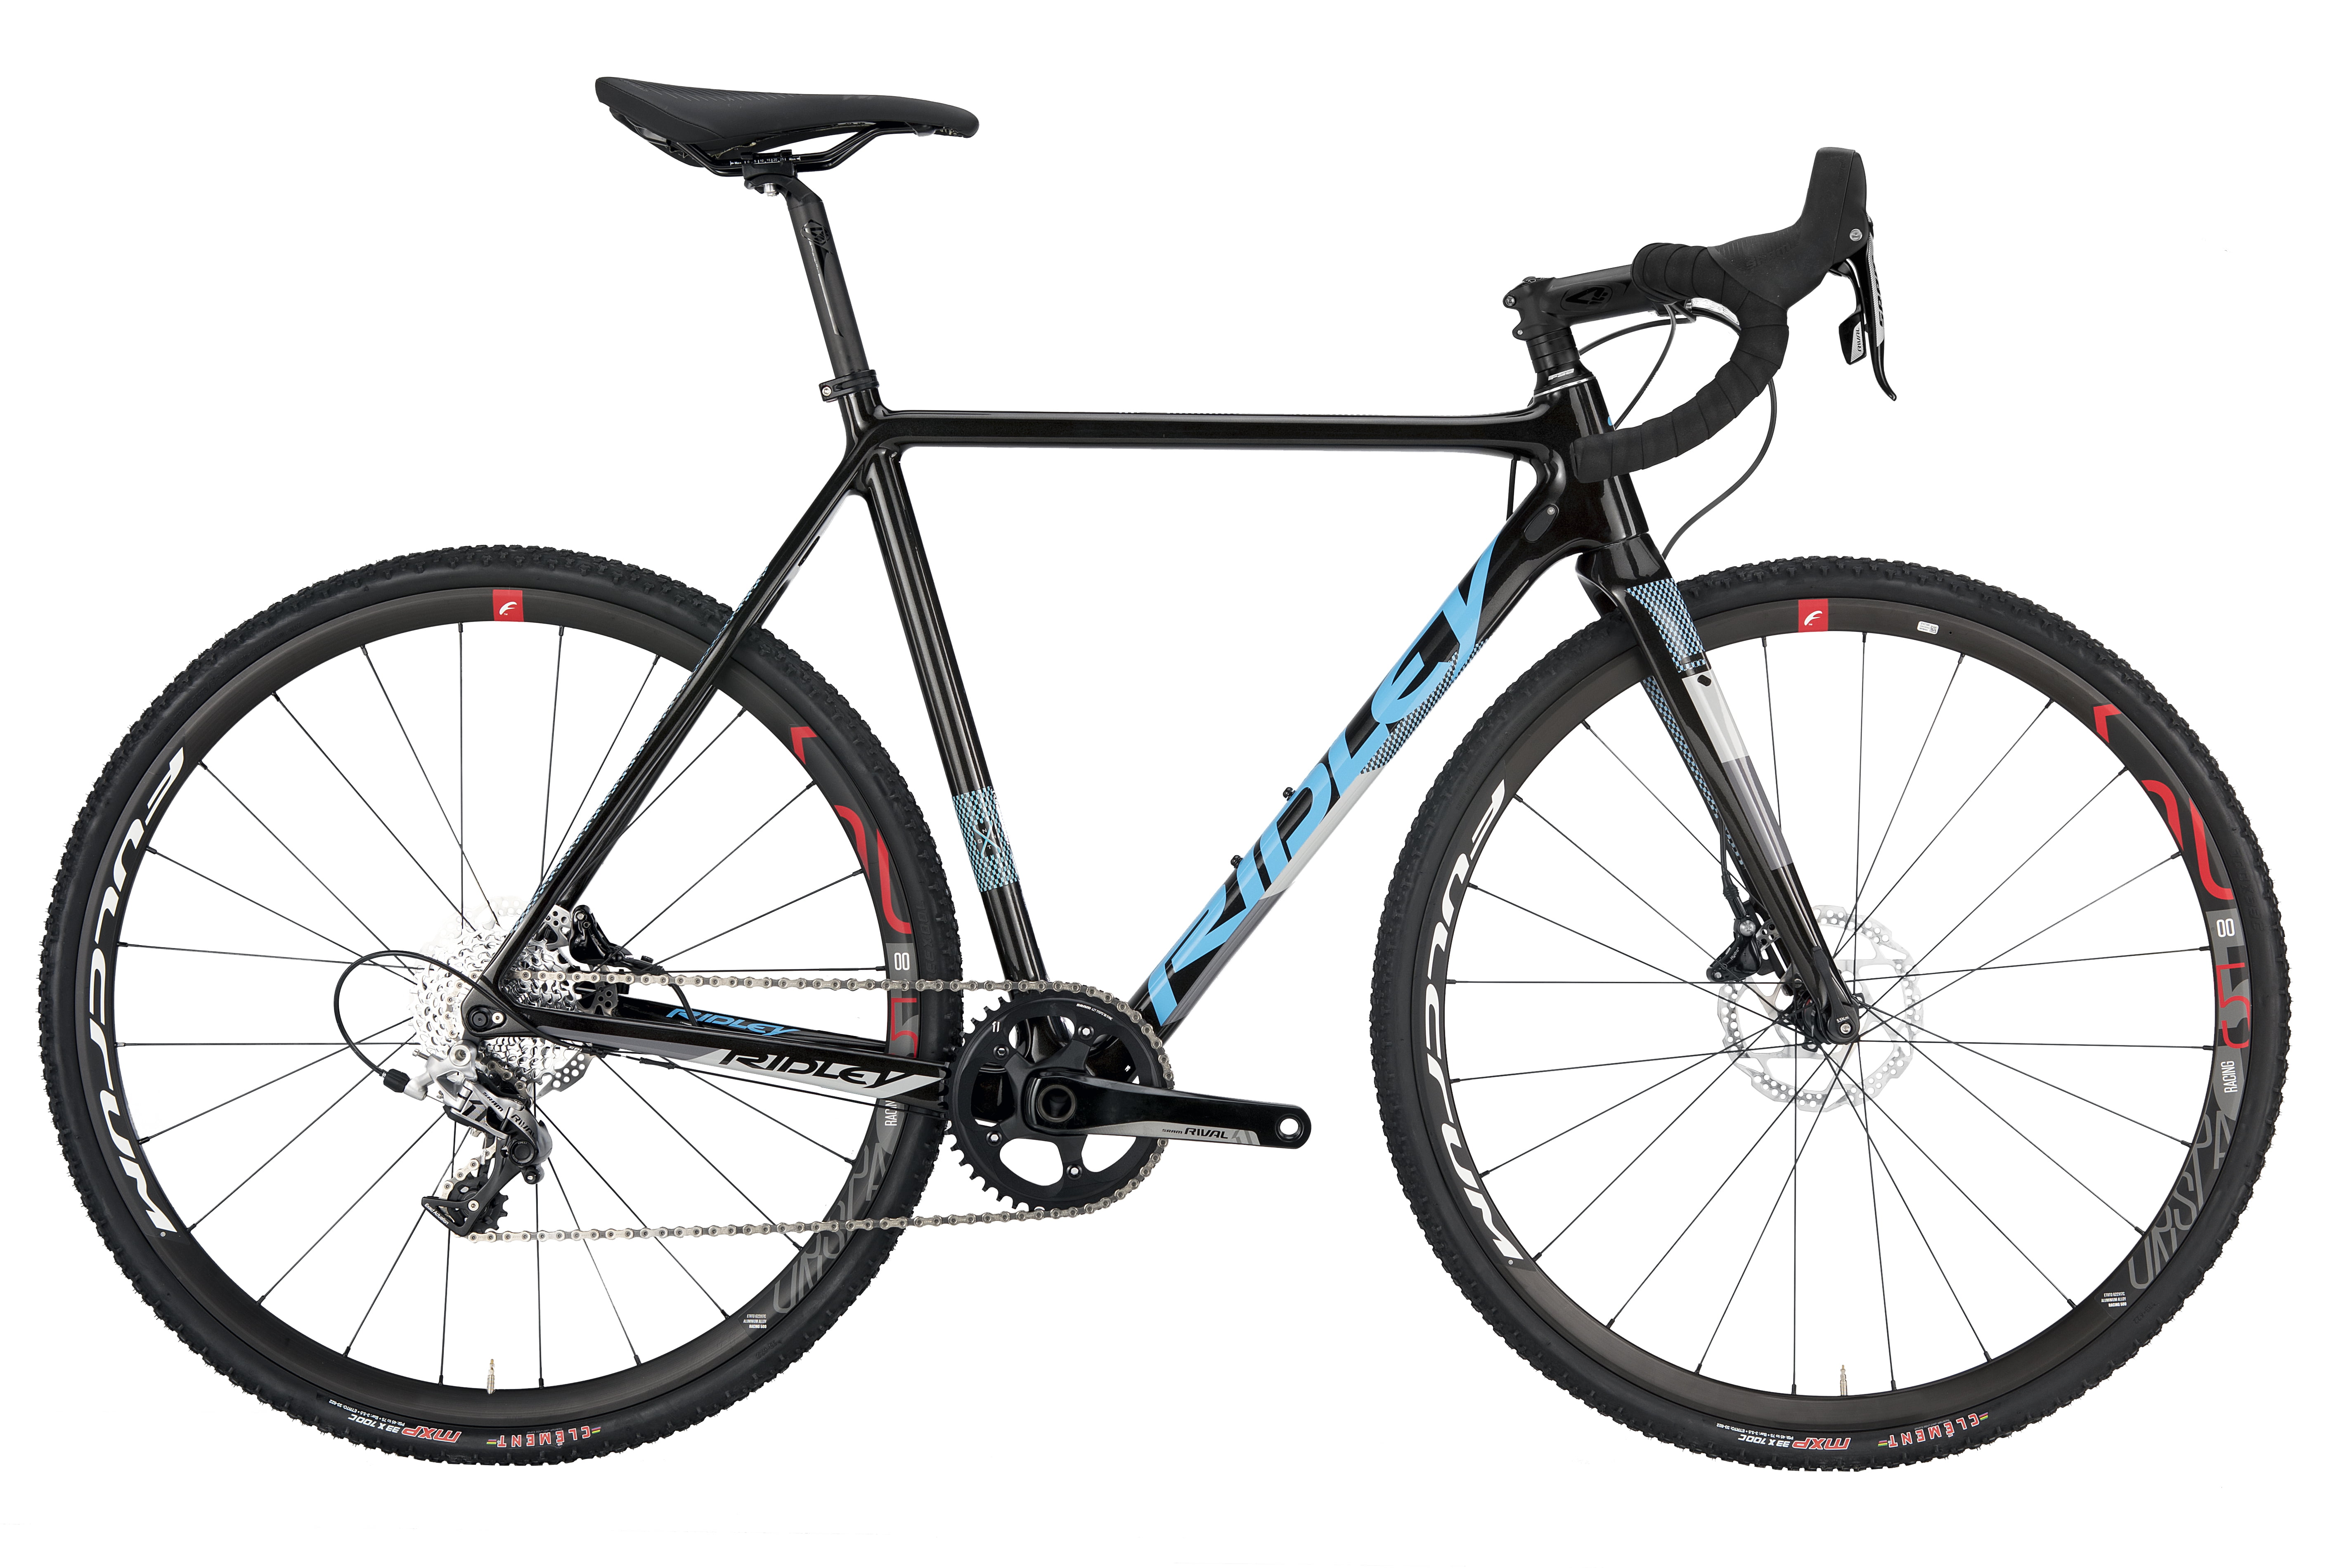 Ridley X-Night Gravel/Cyclocross Bicycle with Disc Brakes and SRAM Rival 1  Groupset / Size M, Black